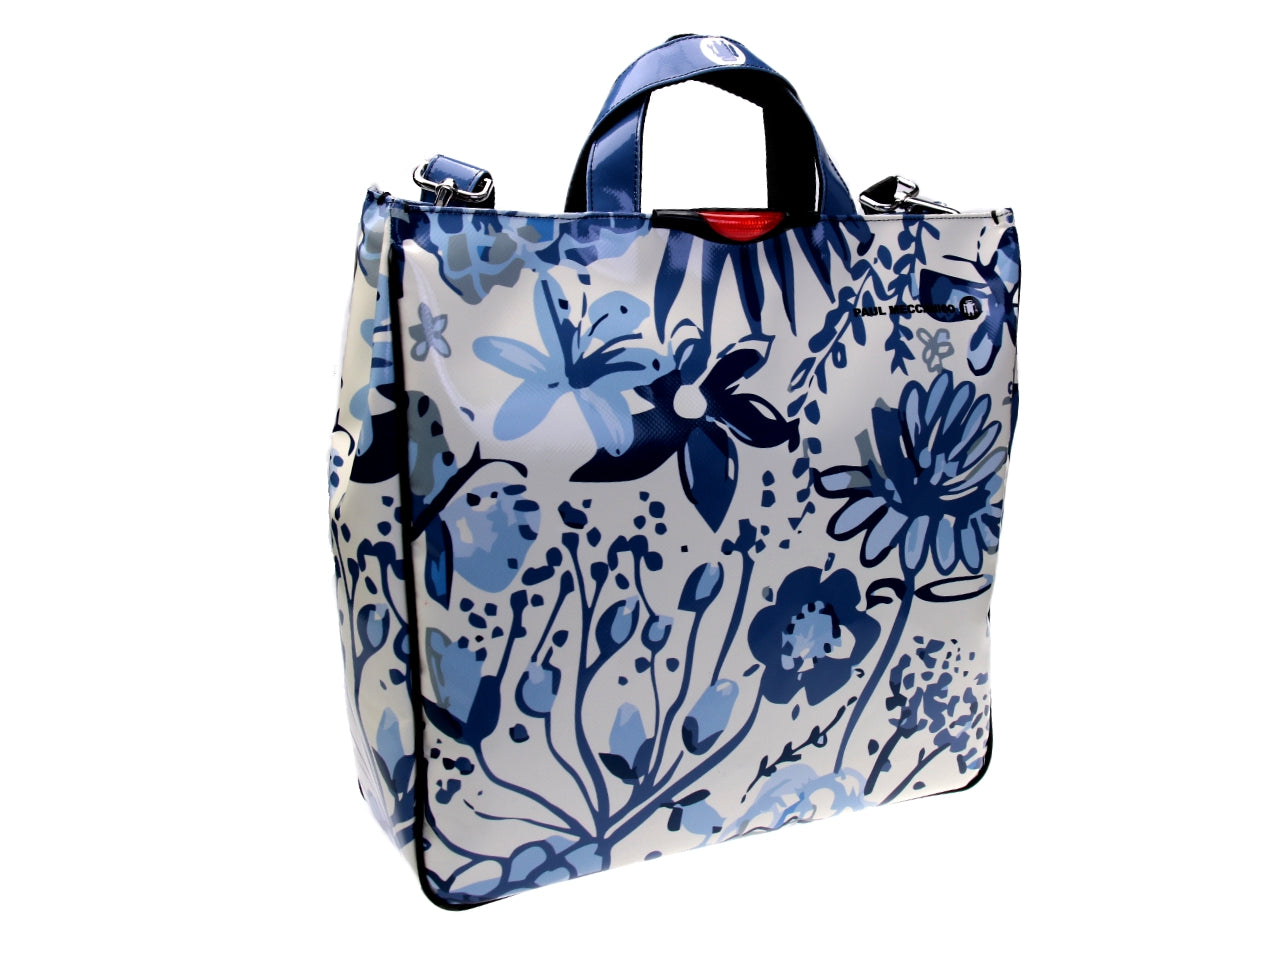 MAXI TOTE BAG BLUE AND OFF WHITE FLORAL FANTASY. MODEL AIRSTONE MADE OF LORRY TARPAULIN. - Unique Pieces Paul Meccanico